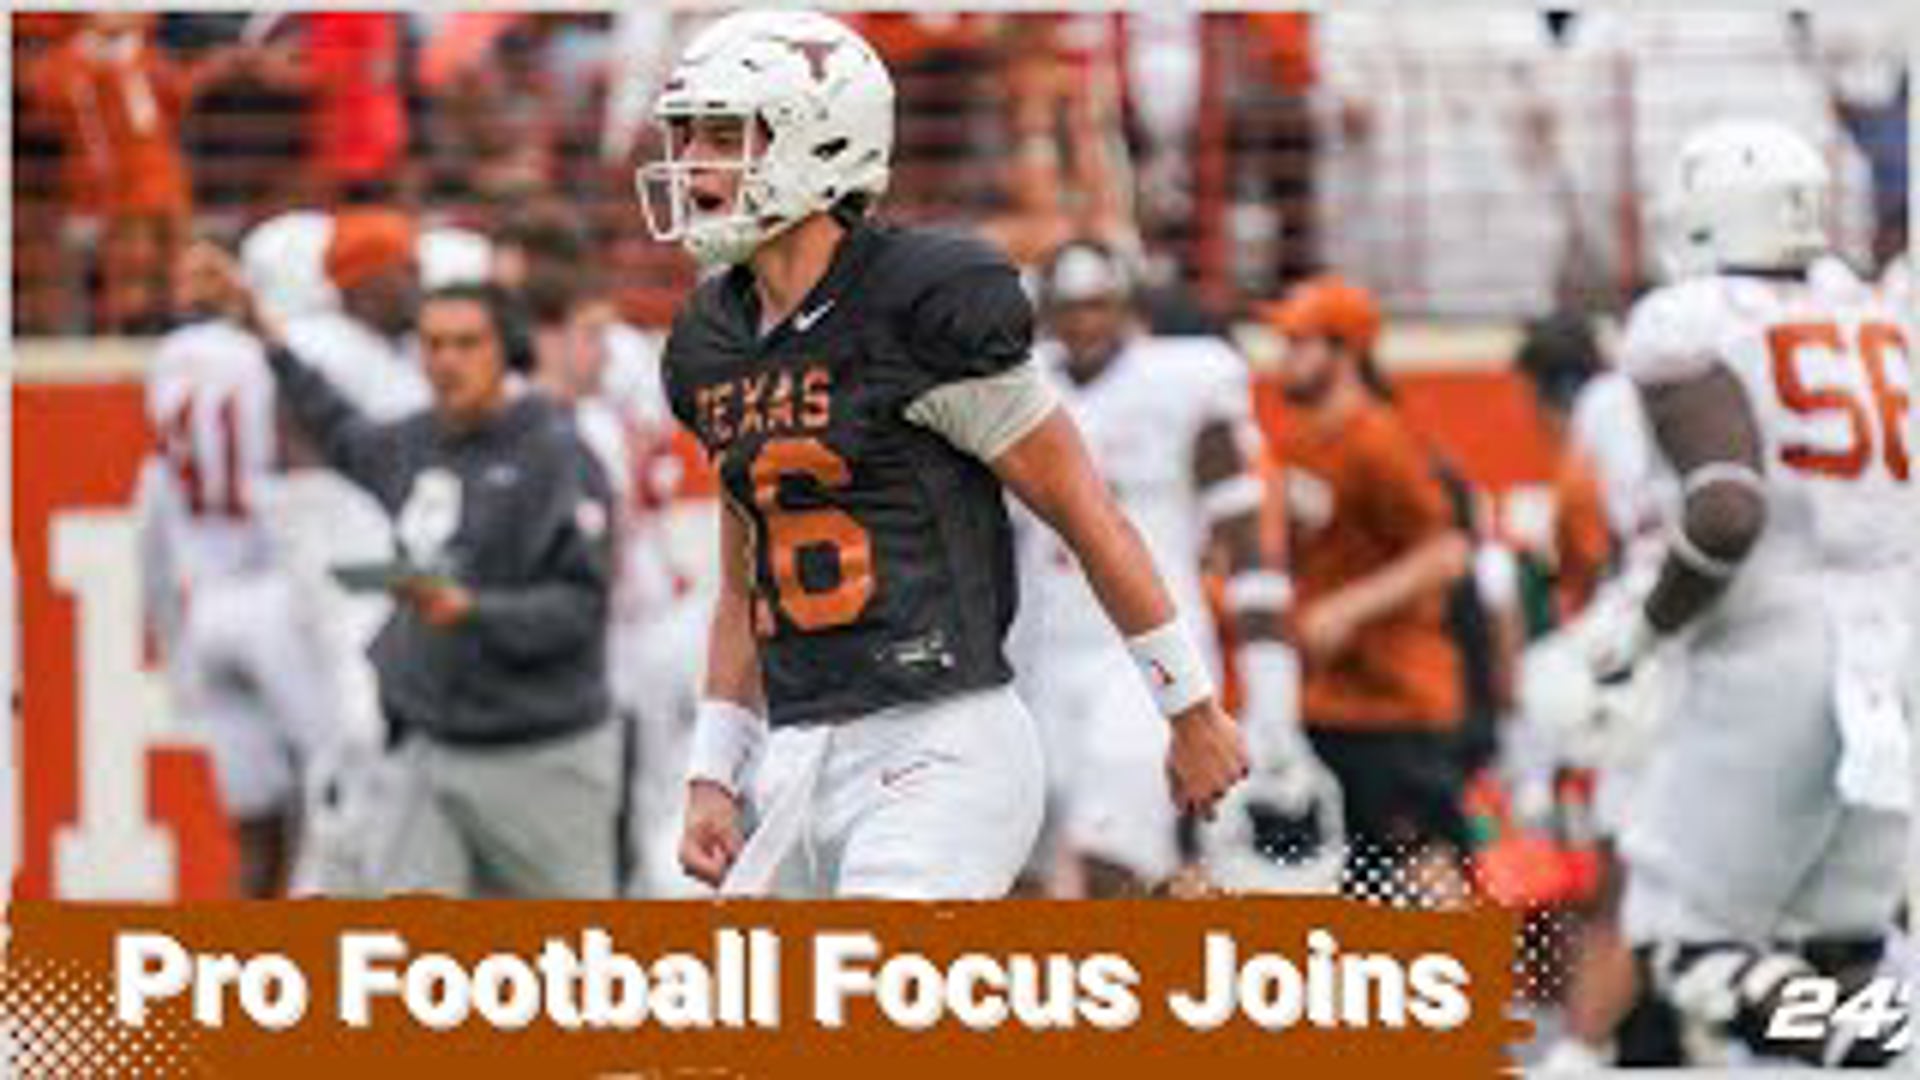 It's been a busy 12 days for the Longhorns as they hosted their spring game, and had 11 players drafted to the National Football League in that span.